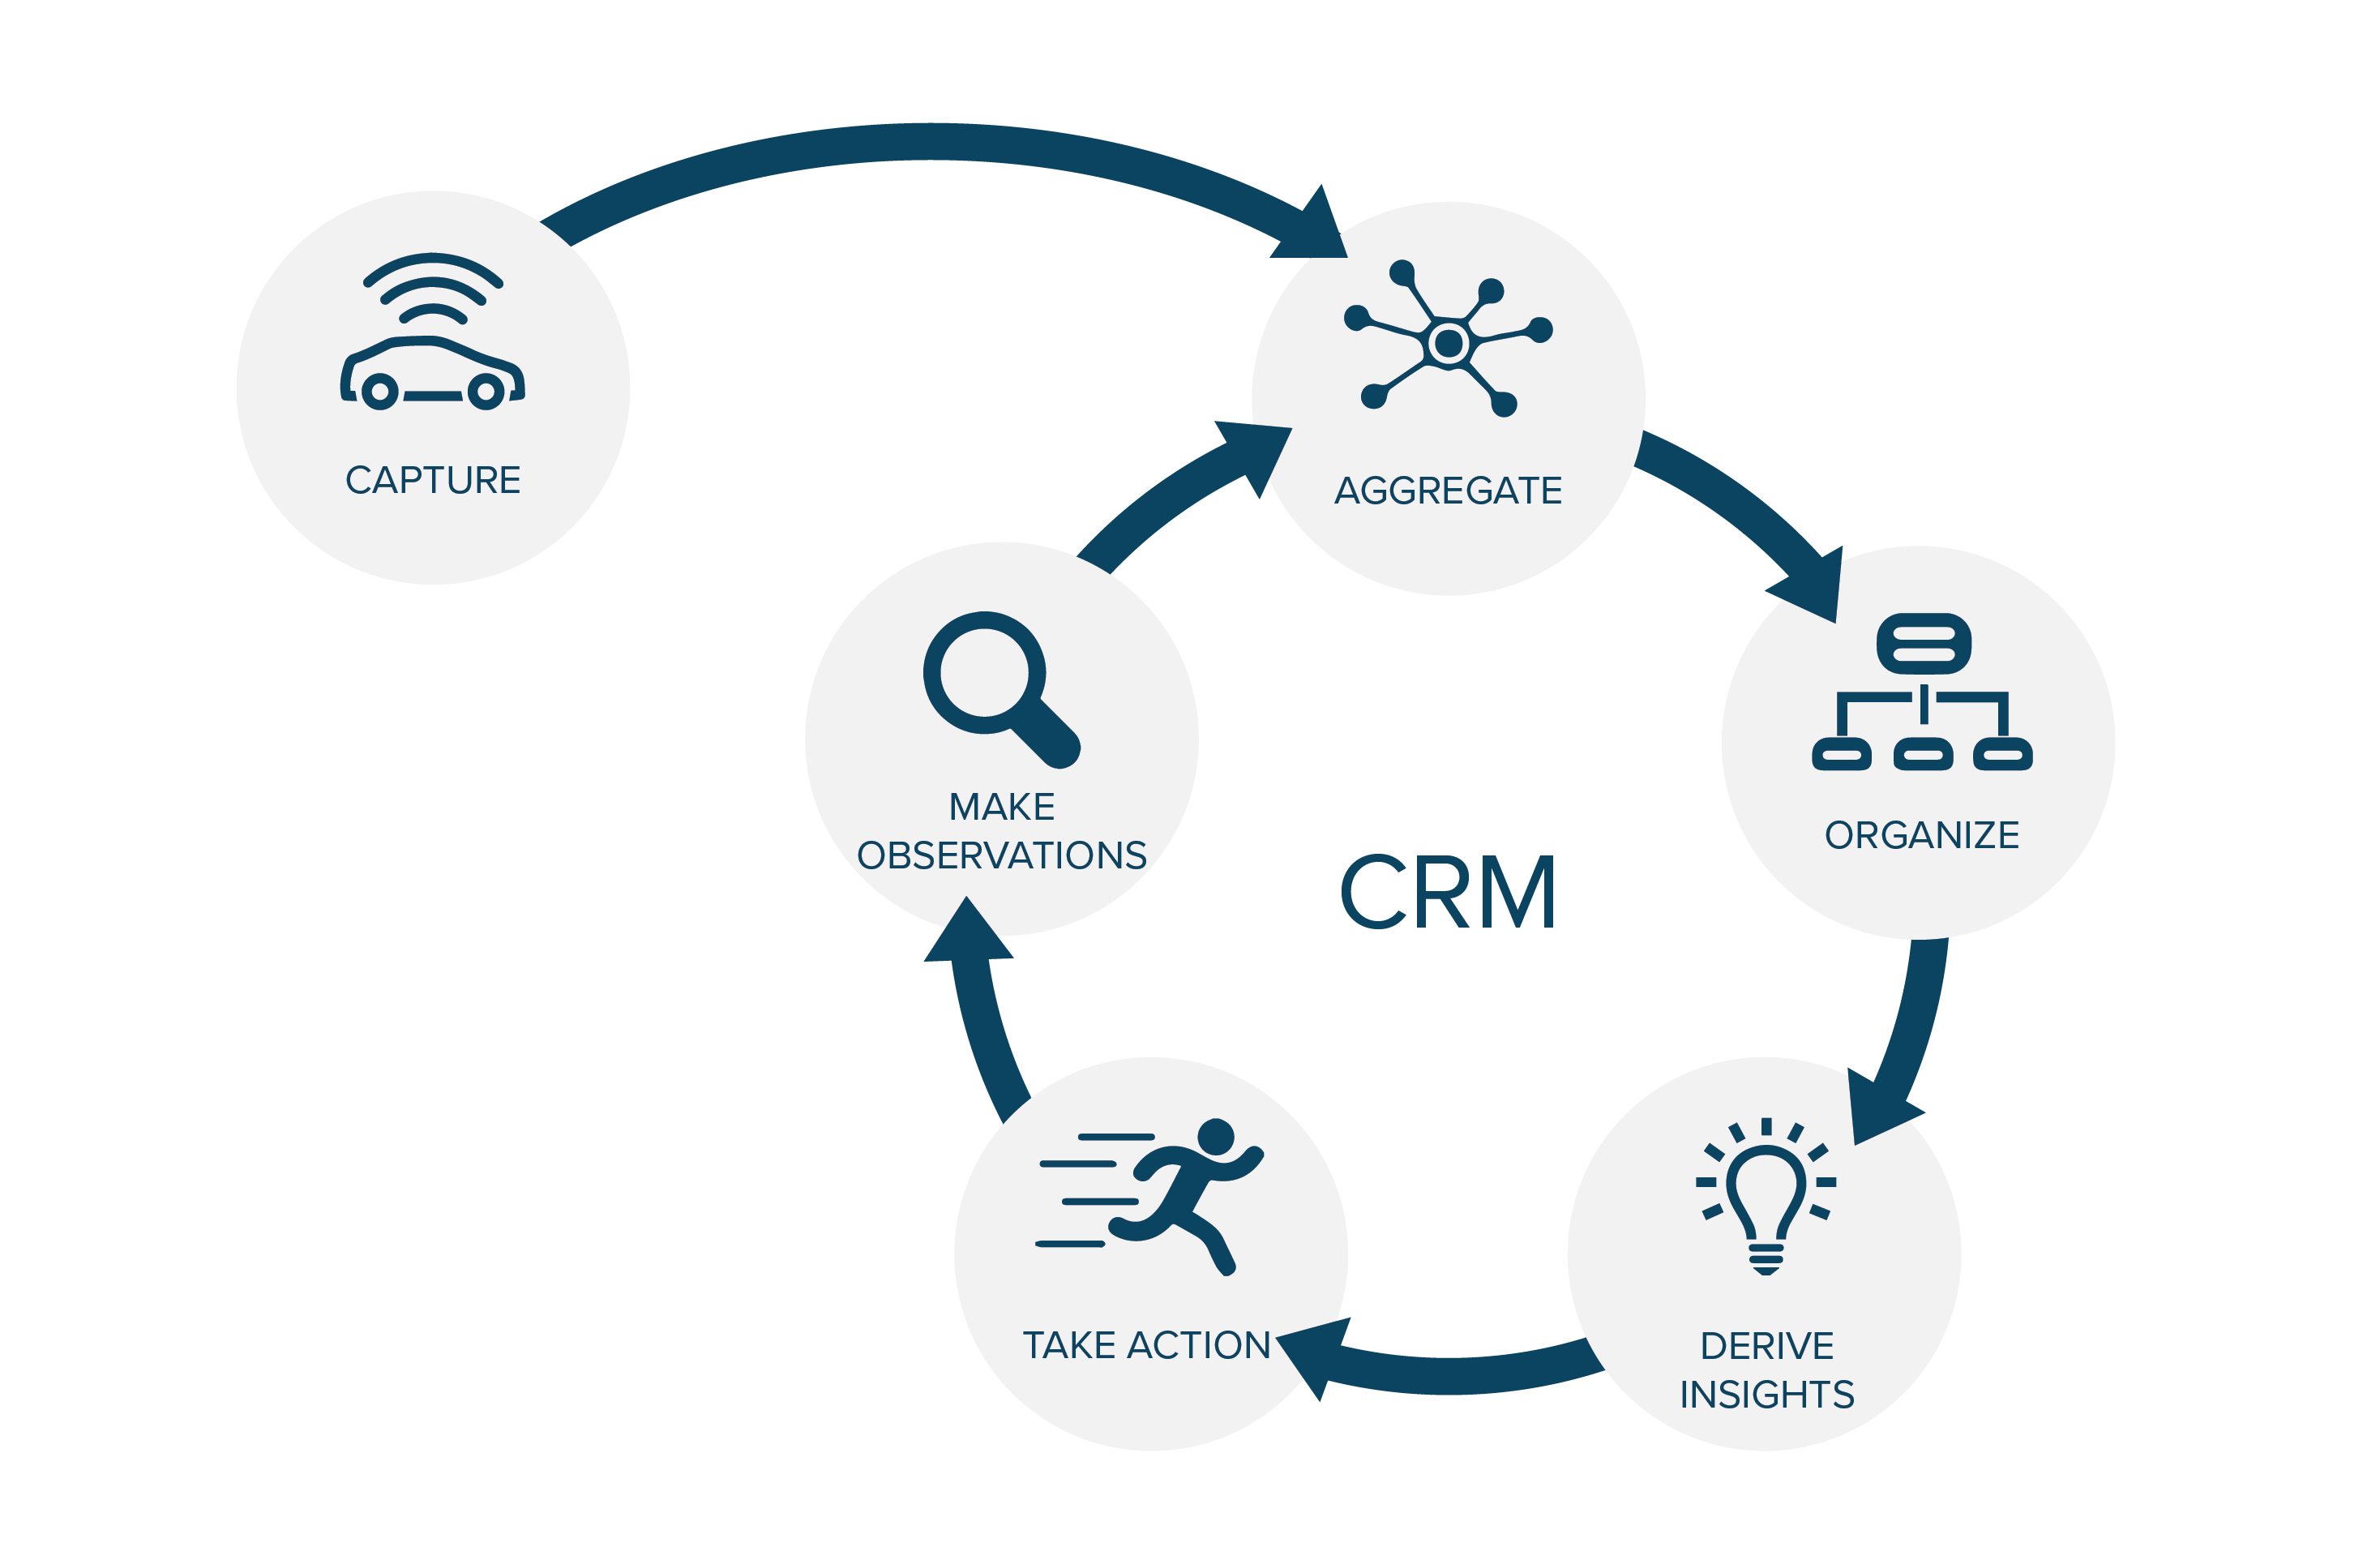 Actionable insights and customer relationship management